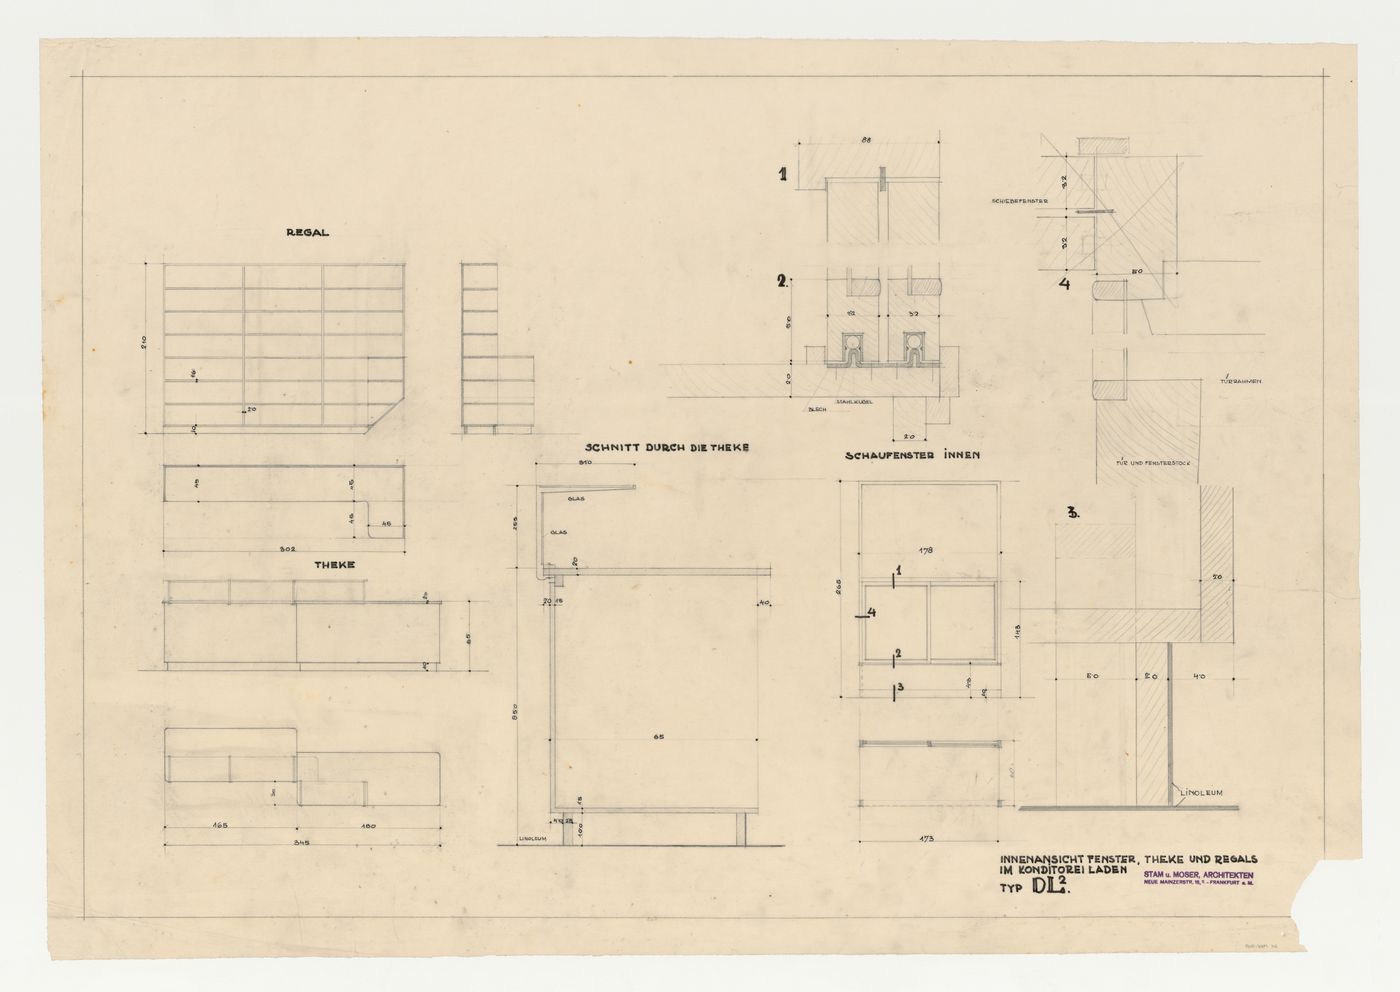 Plans, elevations, and sections for a counter and a shelf, and elevation and sectional details for a window for a type DL2 confectionery, probably for Hellerhof Housing Estate, Frankfurt am Main, Germany